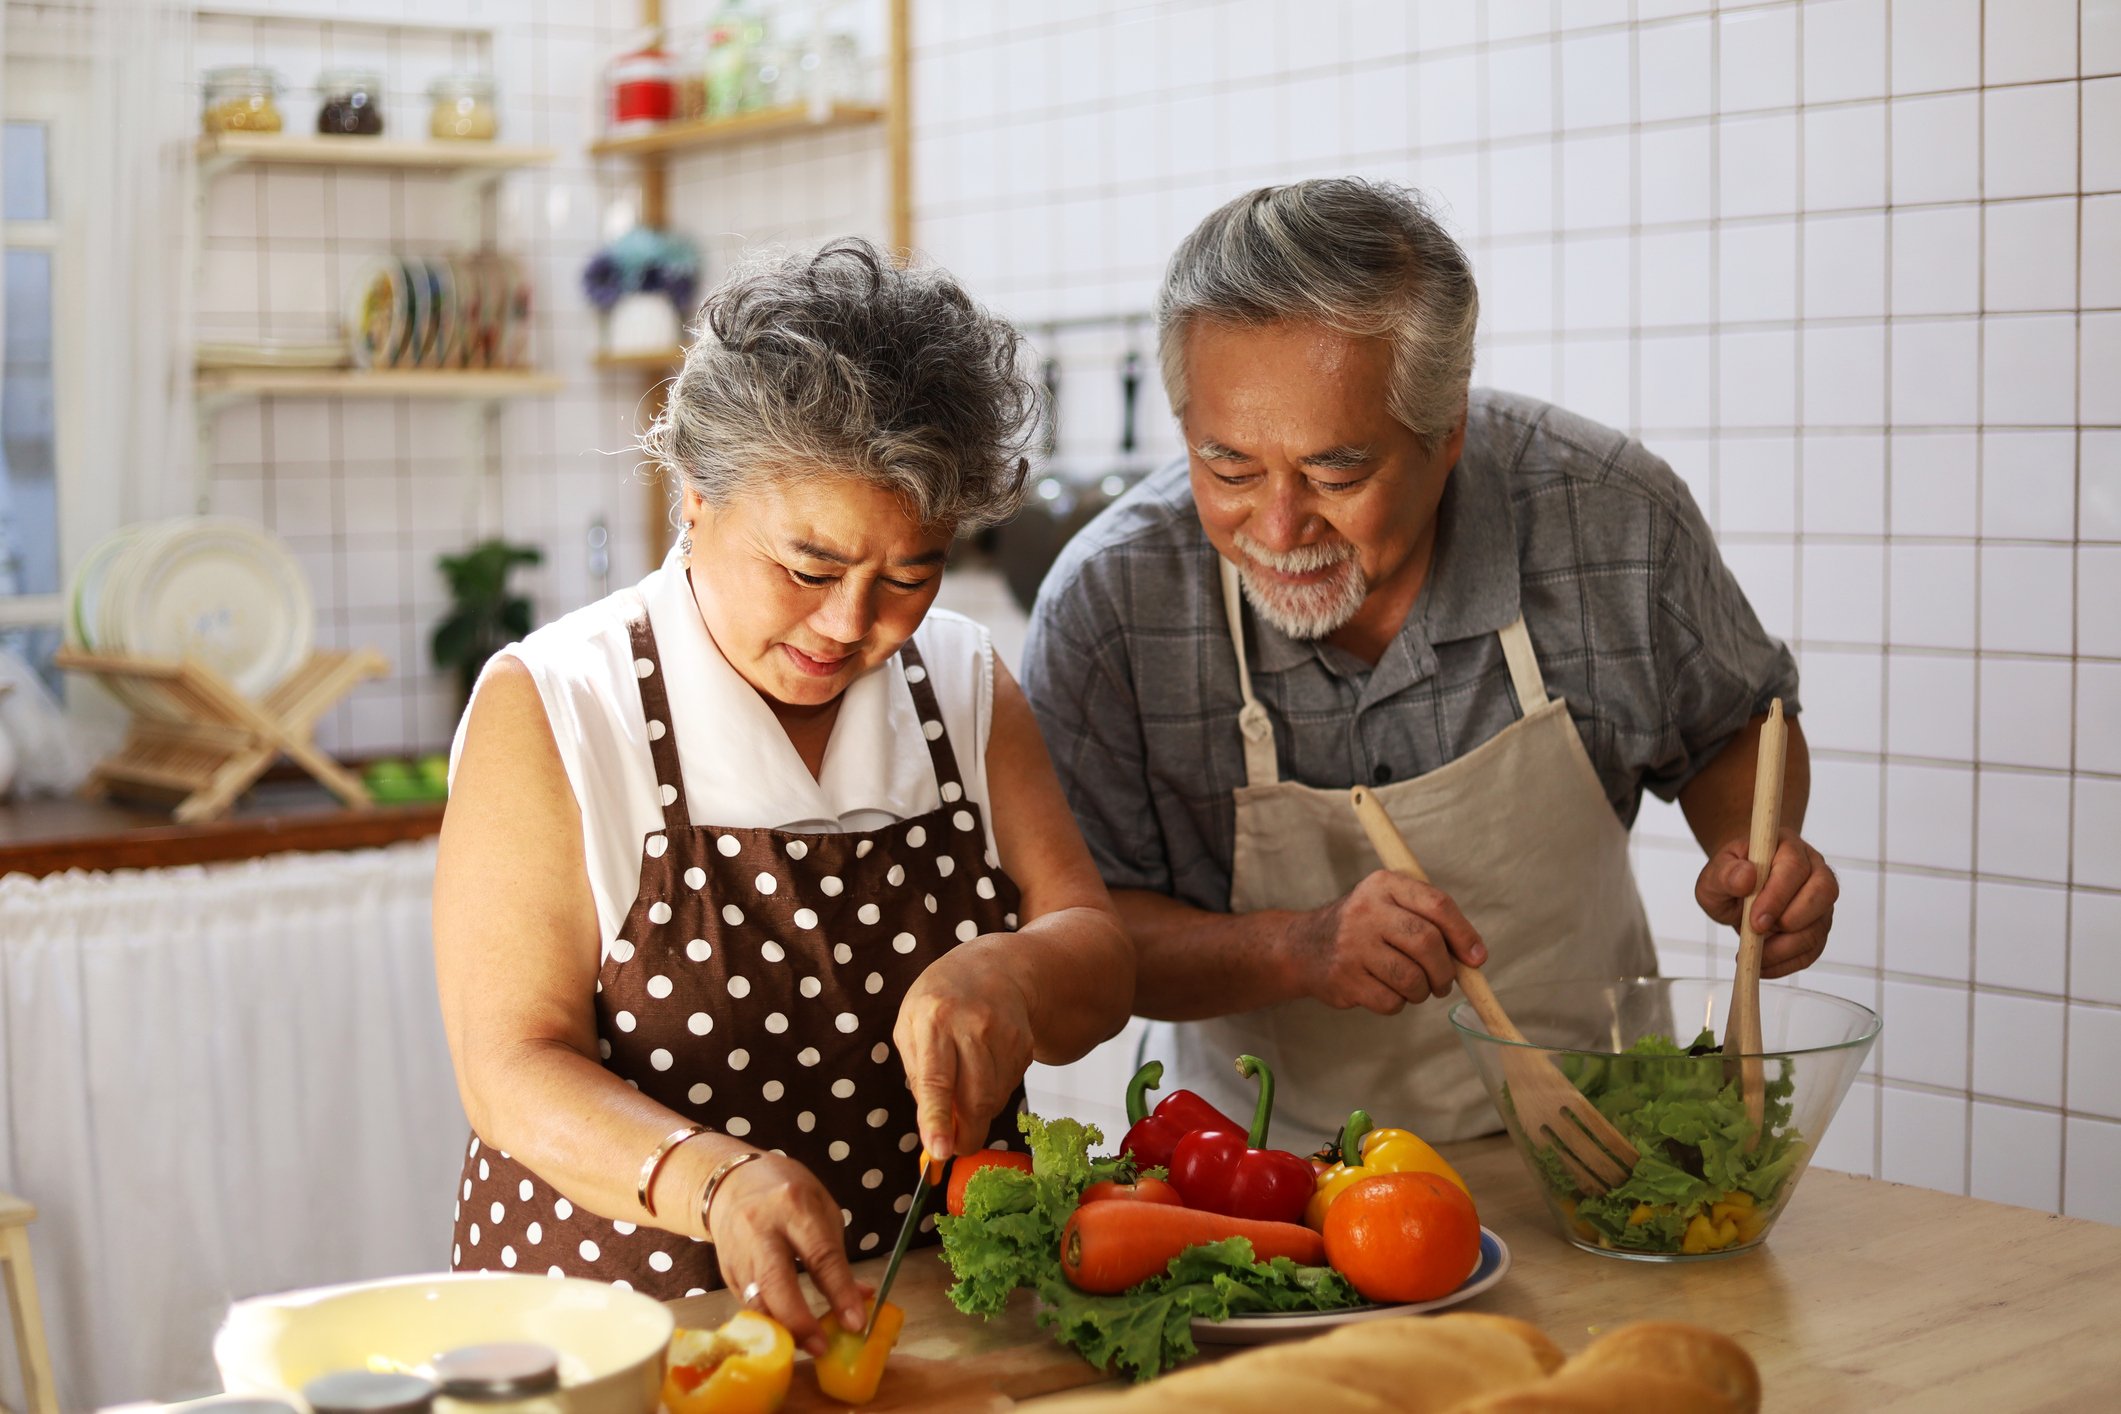 For Alzheimer’s prevention and management, consider these nutrition strategies